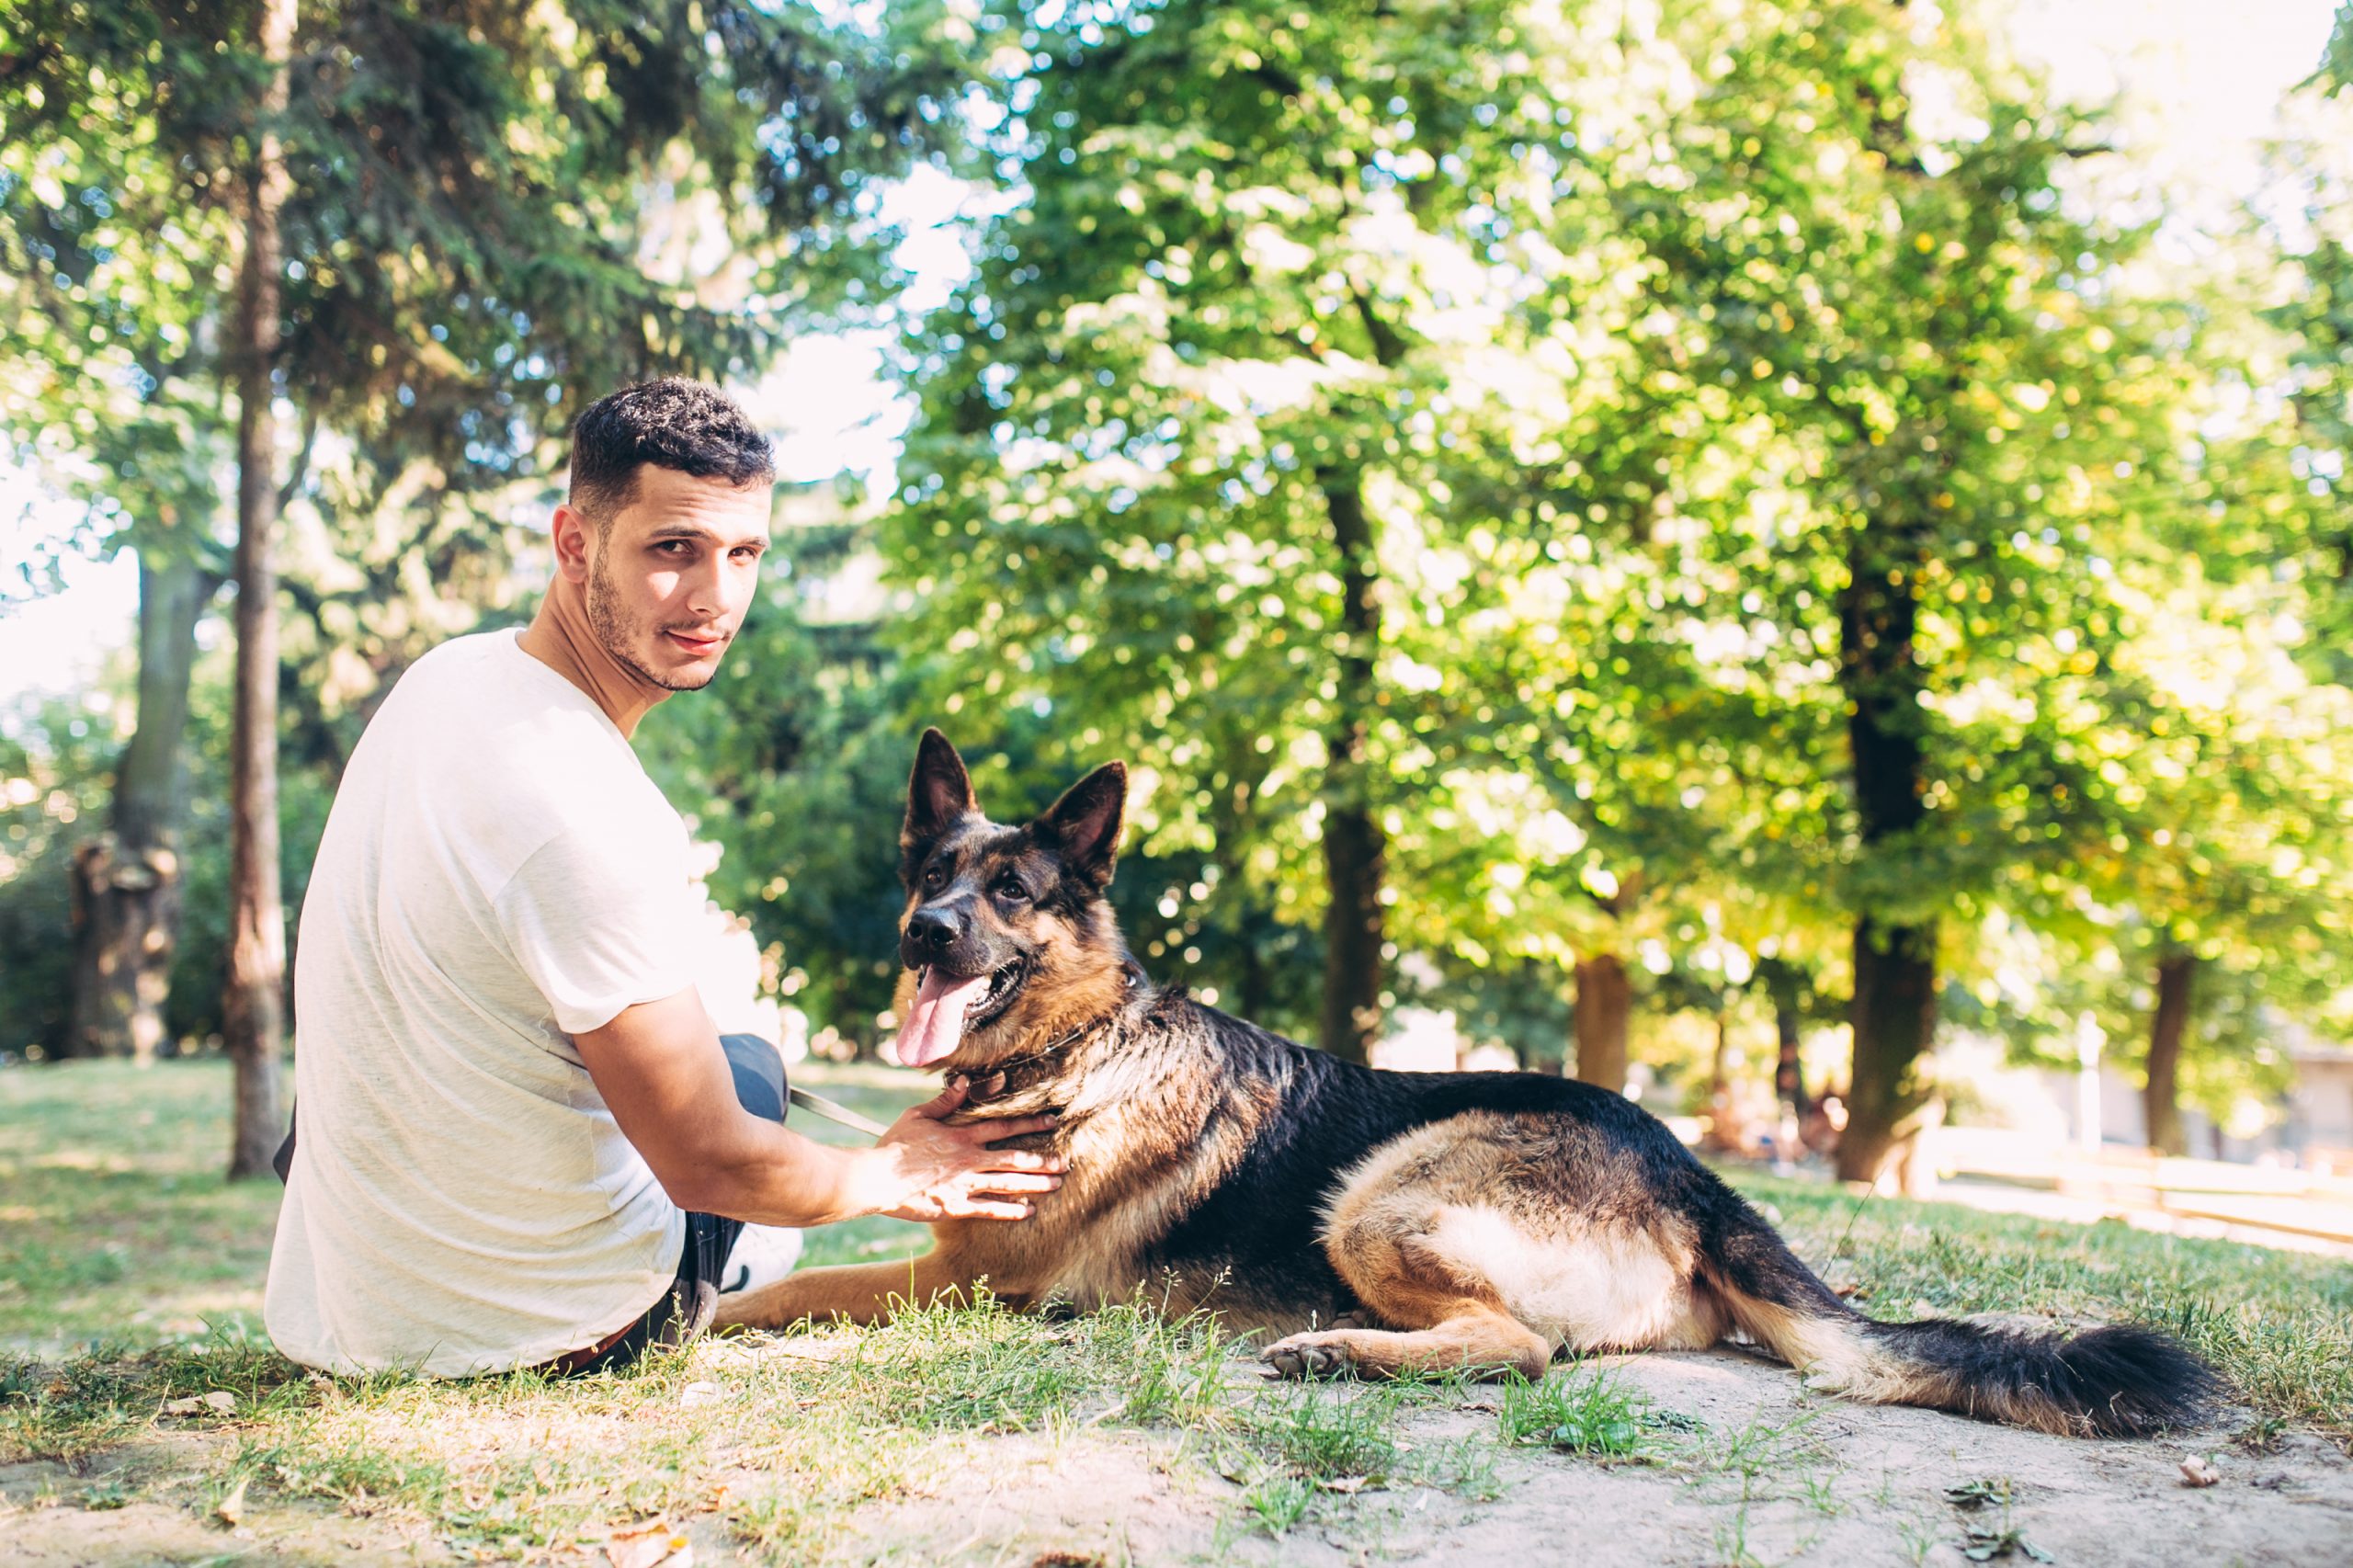 5 Expert Tips for Training a Dog: Guide for Pet Owners